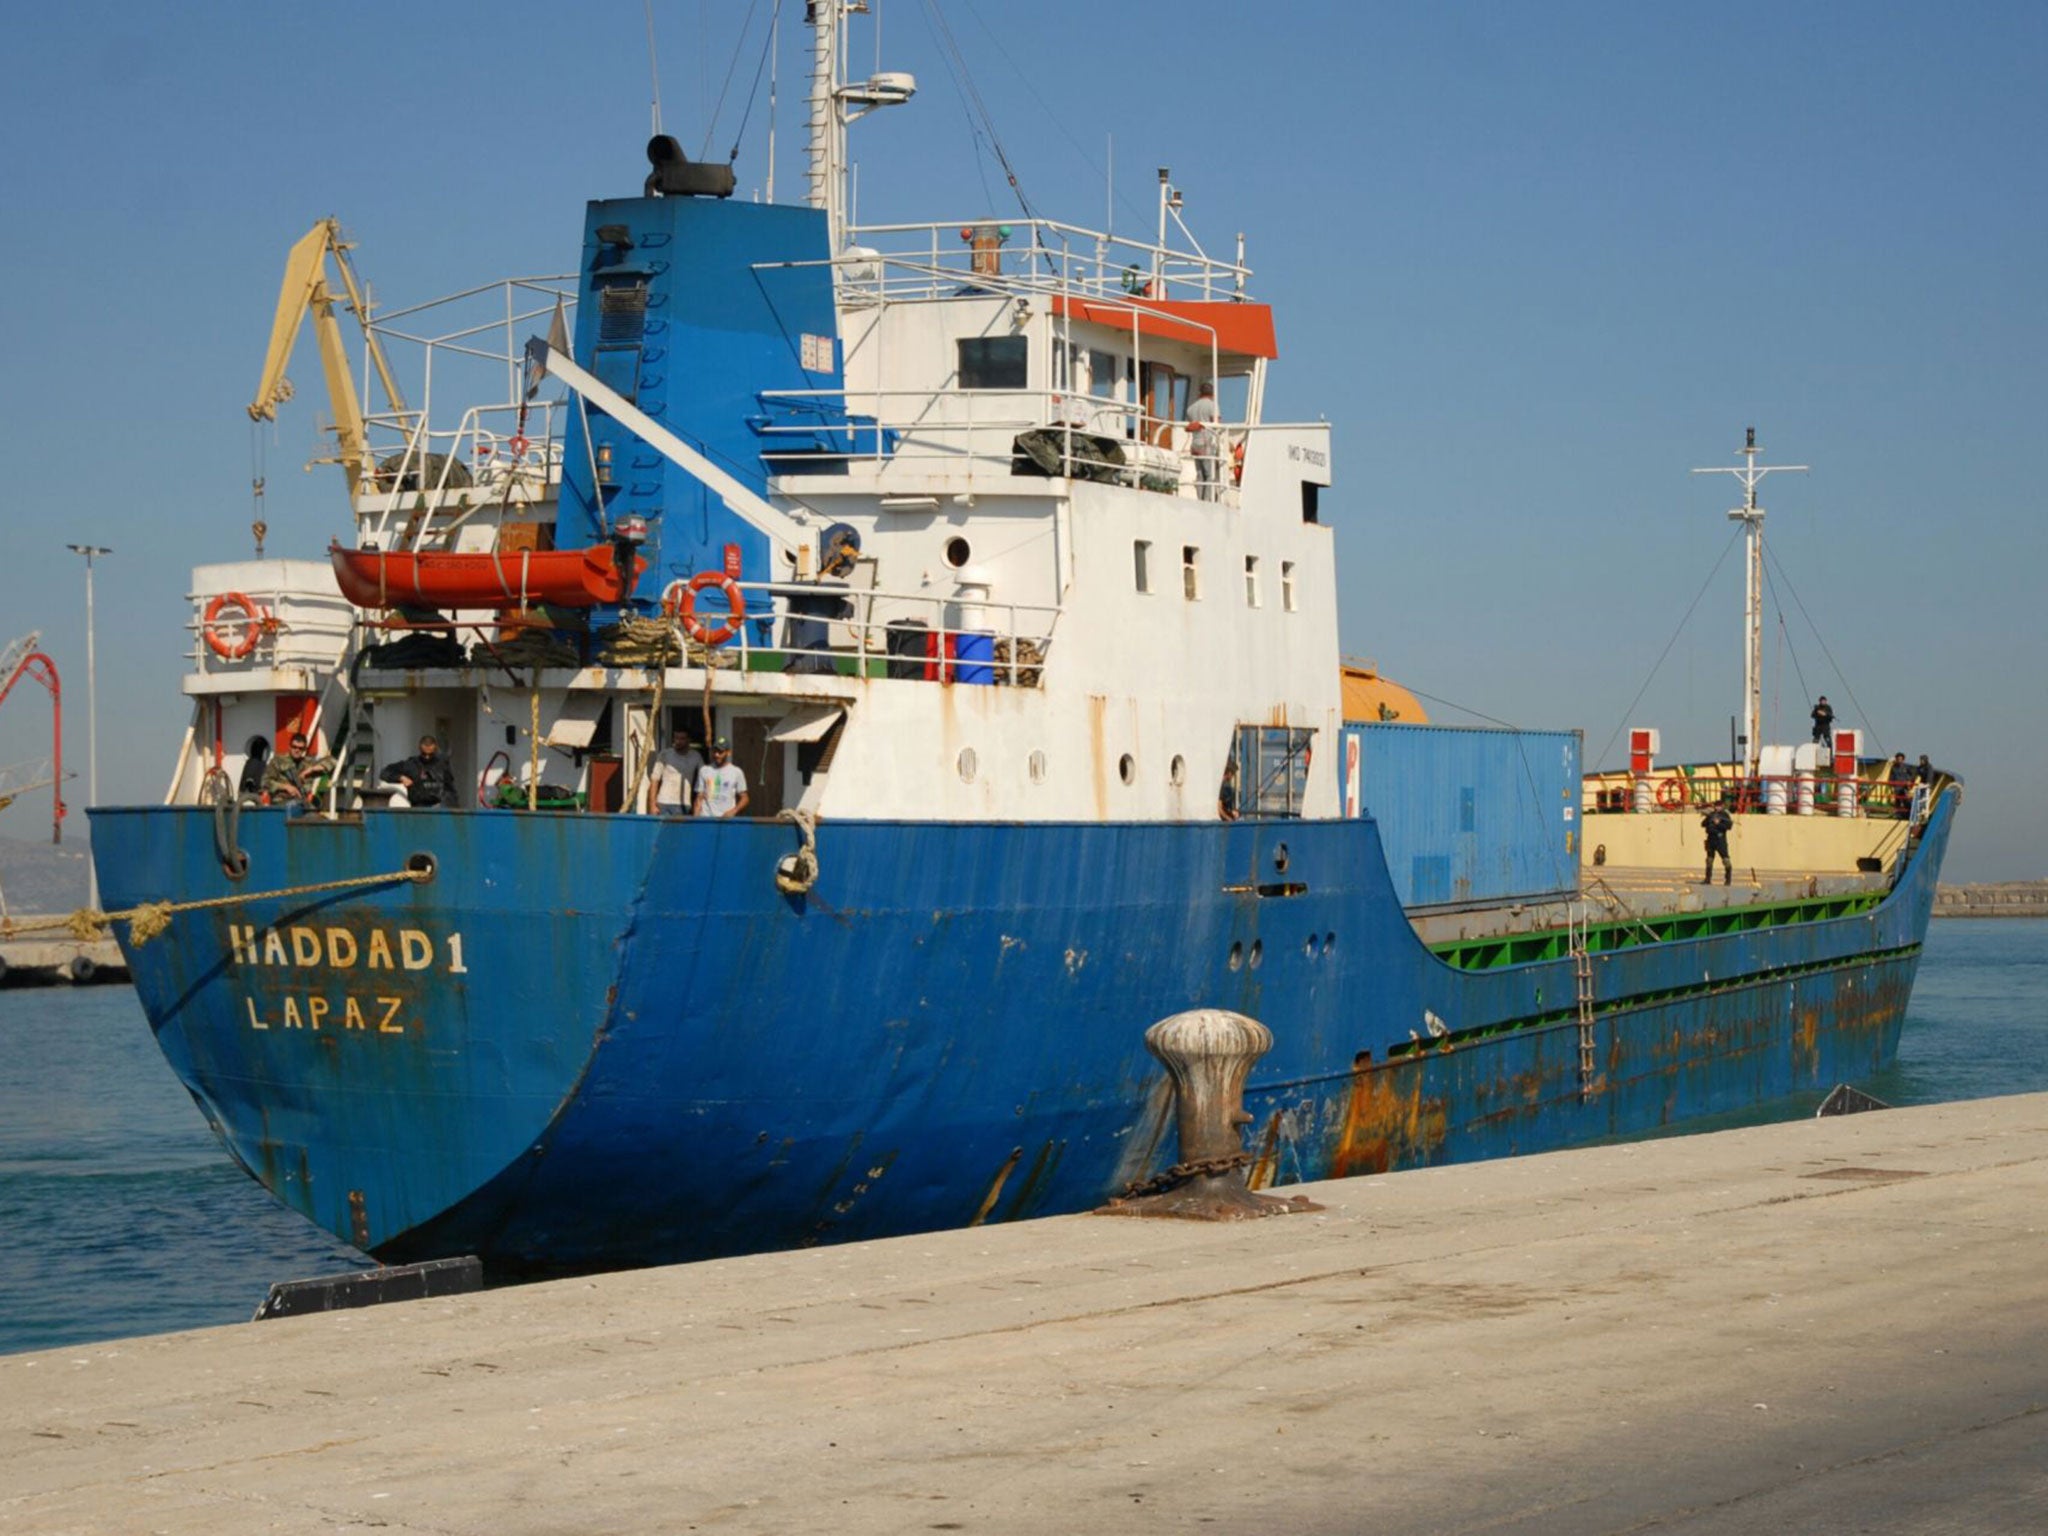 The cagro ship Haddad 1 was reportedly registered in Bolivia and was manned by a crew from several countries